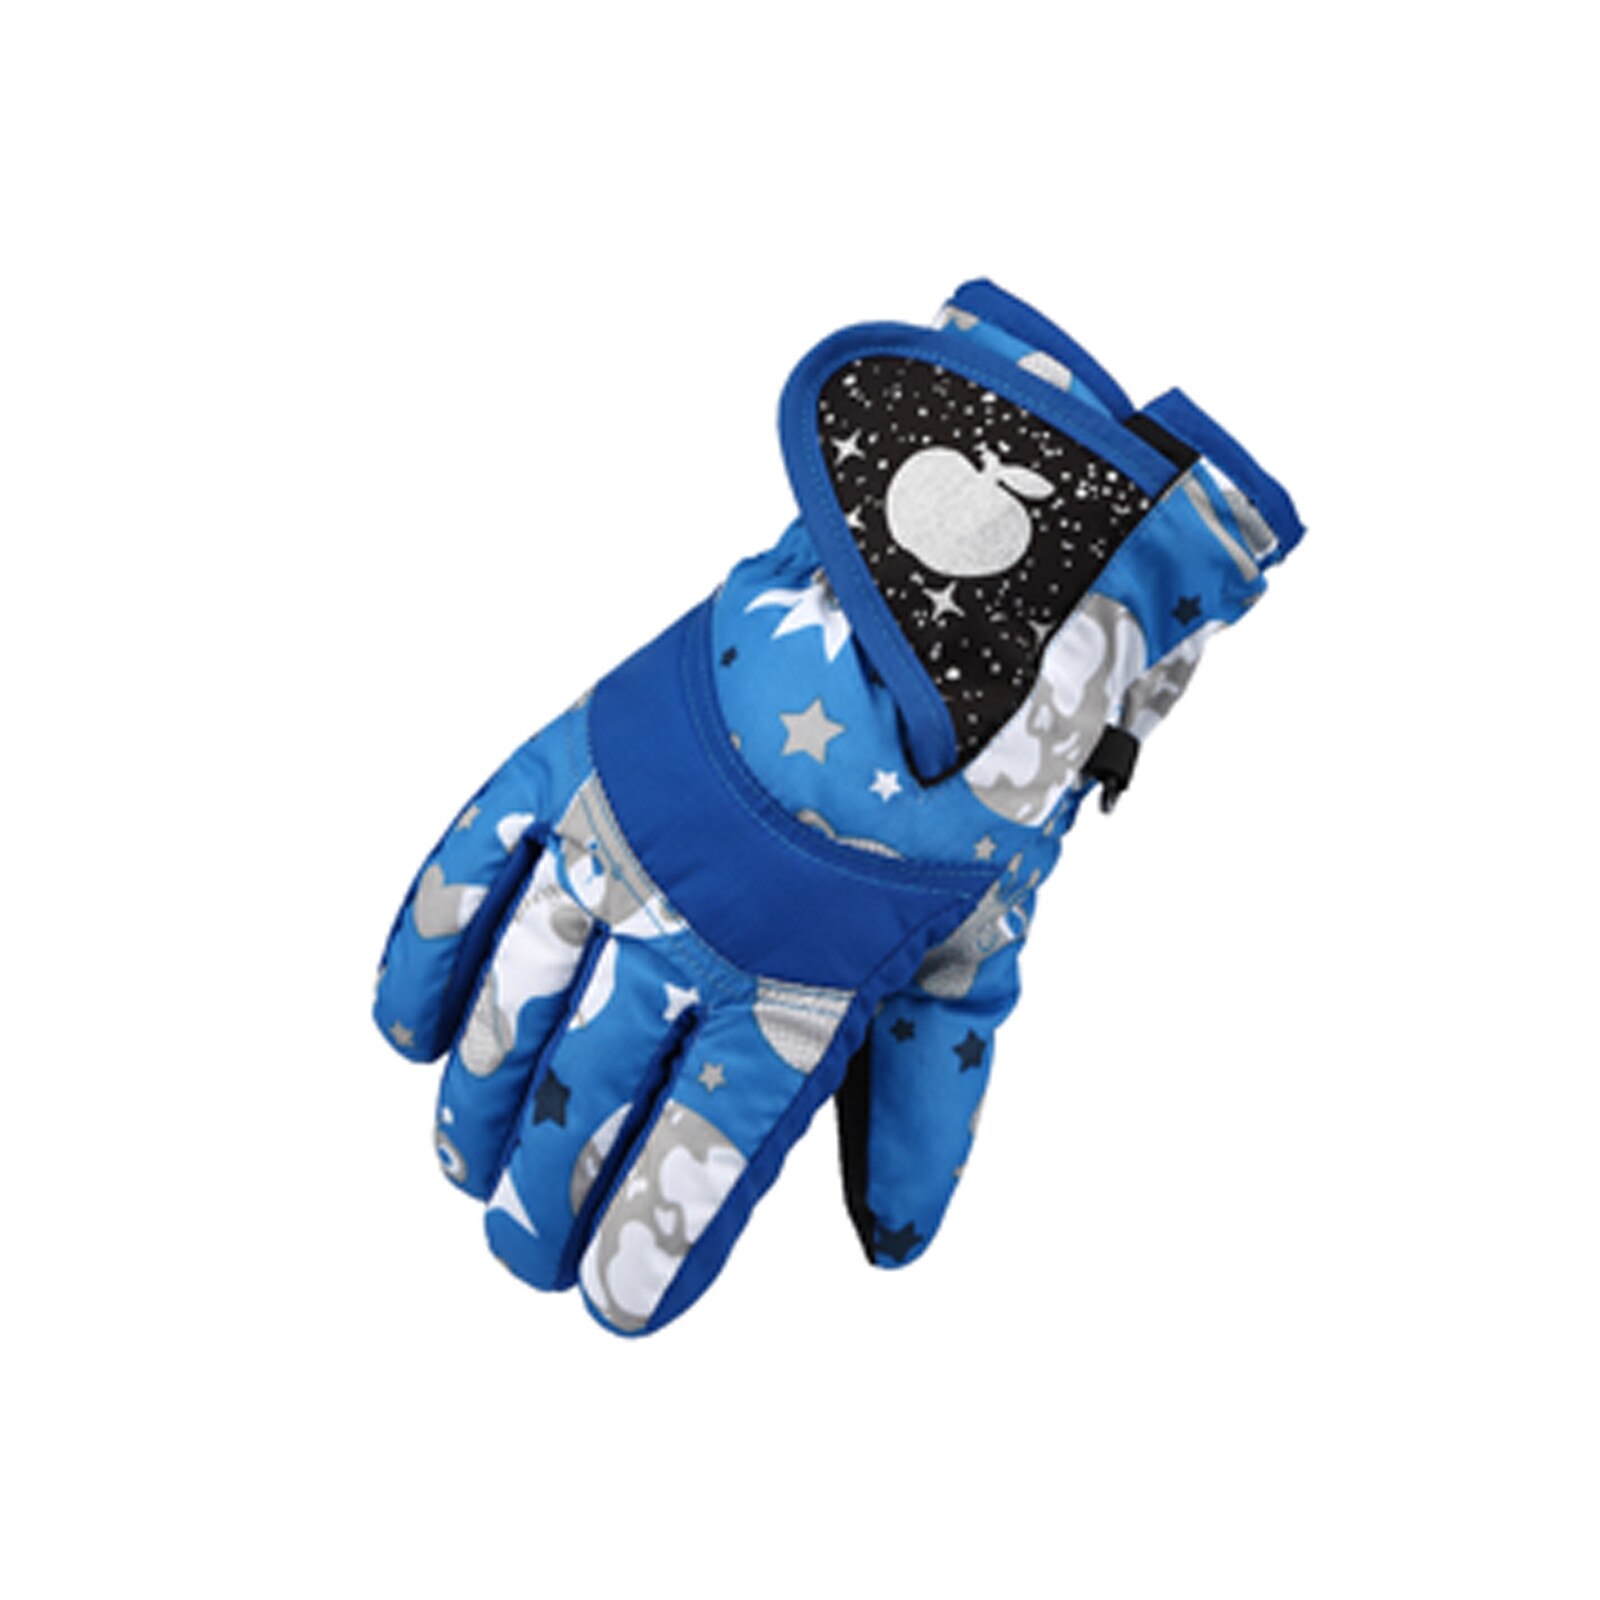 Newest Winter Gloves for Kids Boys Girls Snow Windproof Mittens Outdoor Sports Skiing: D